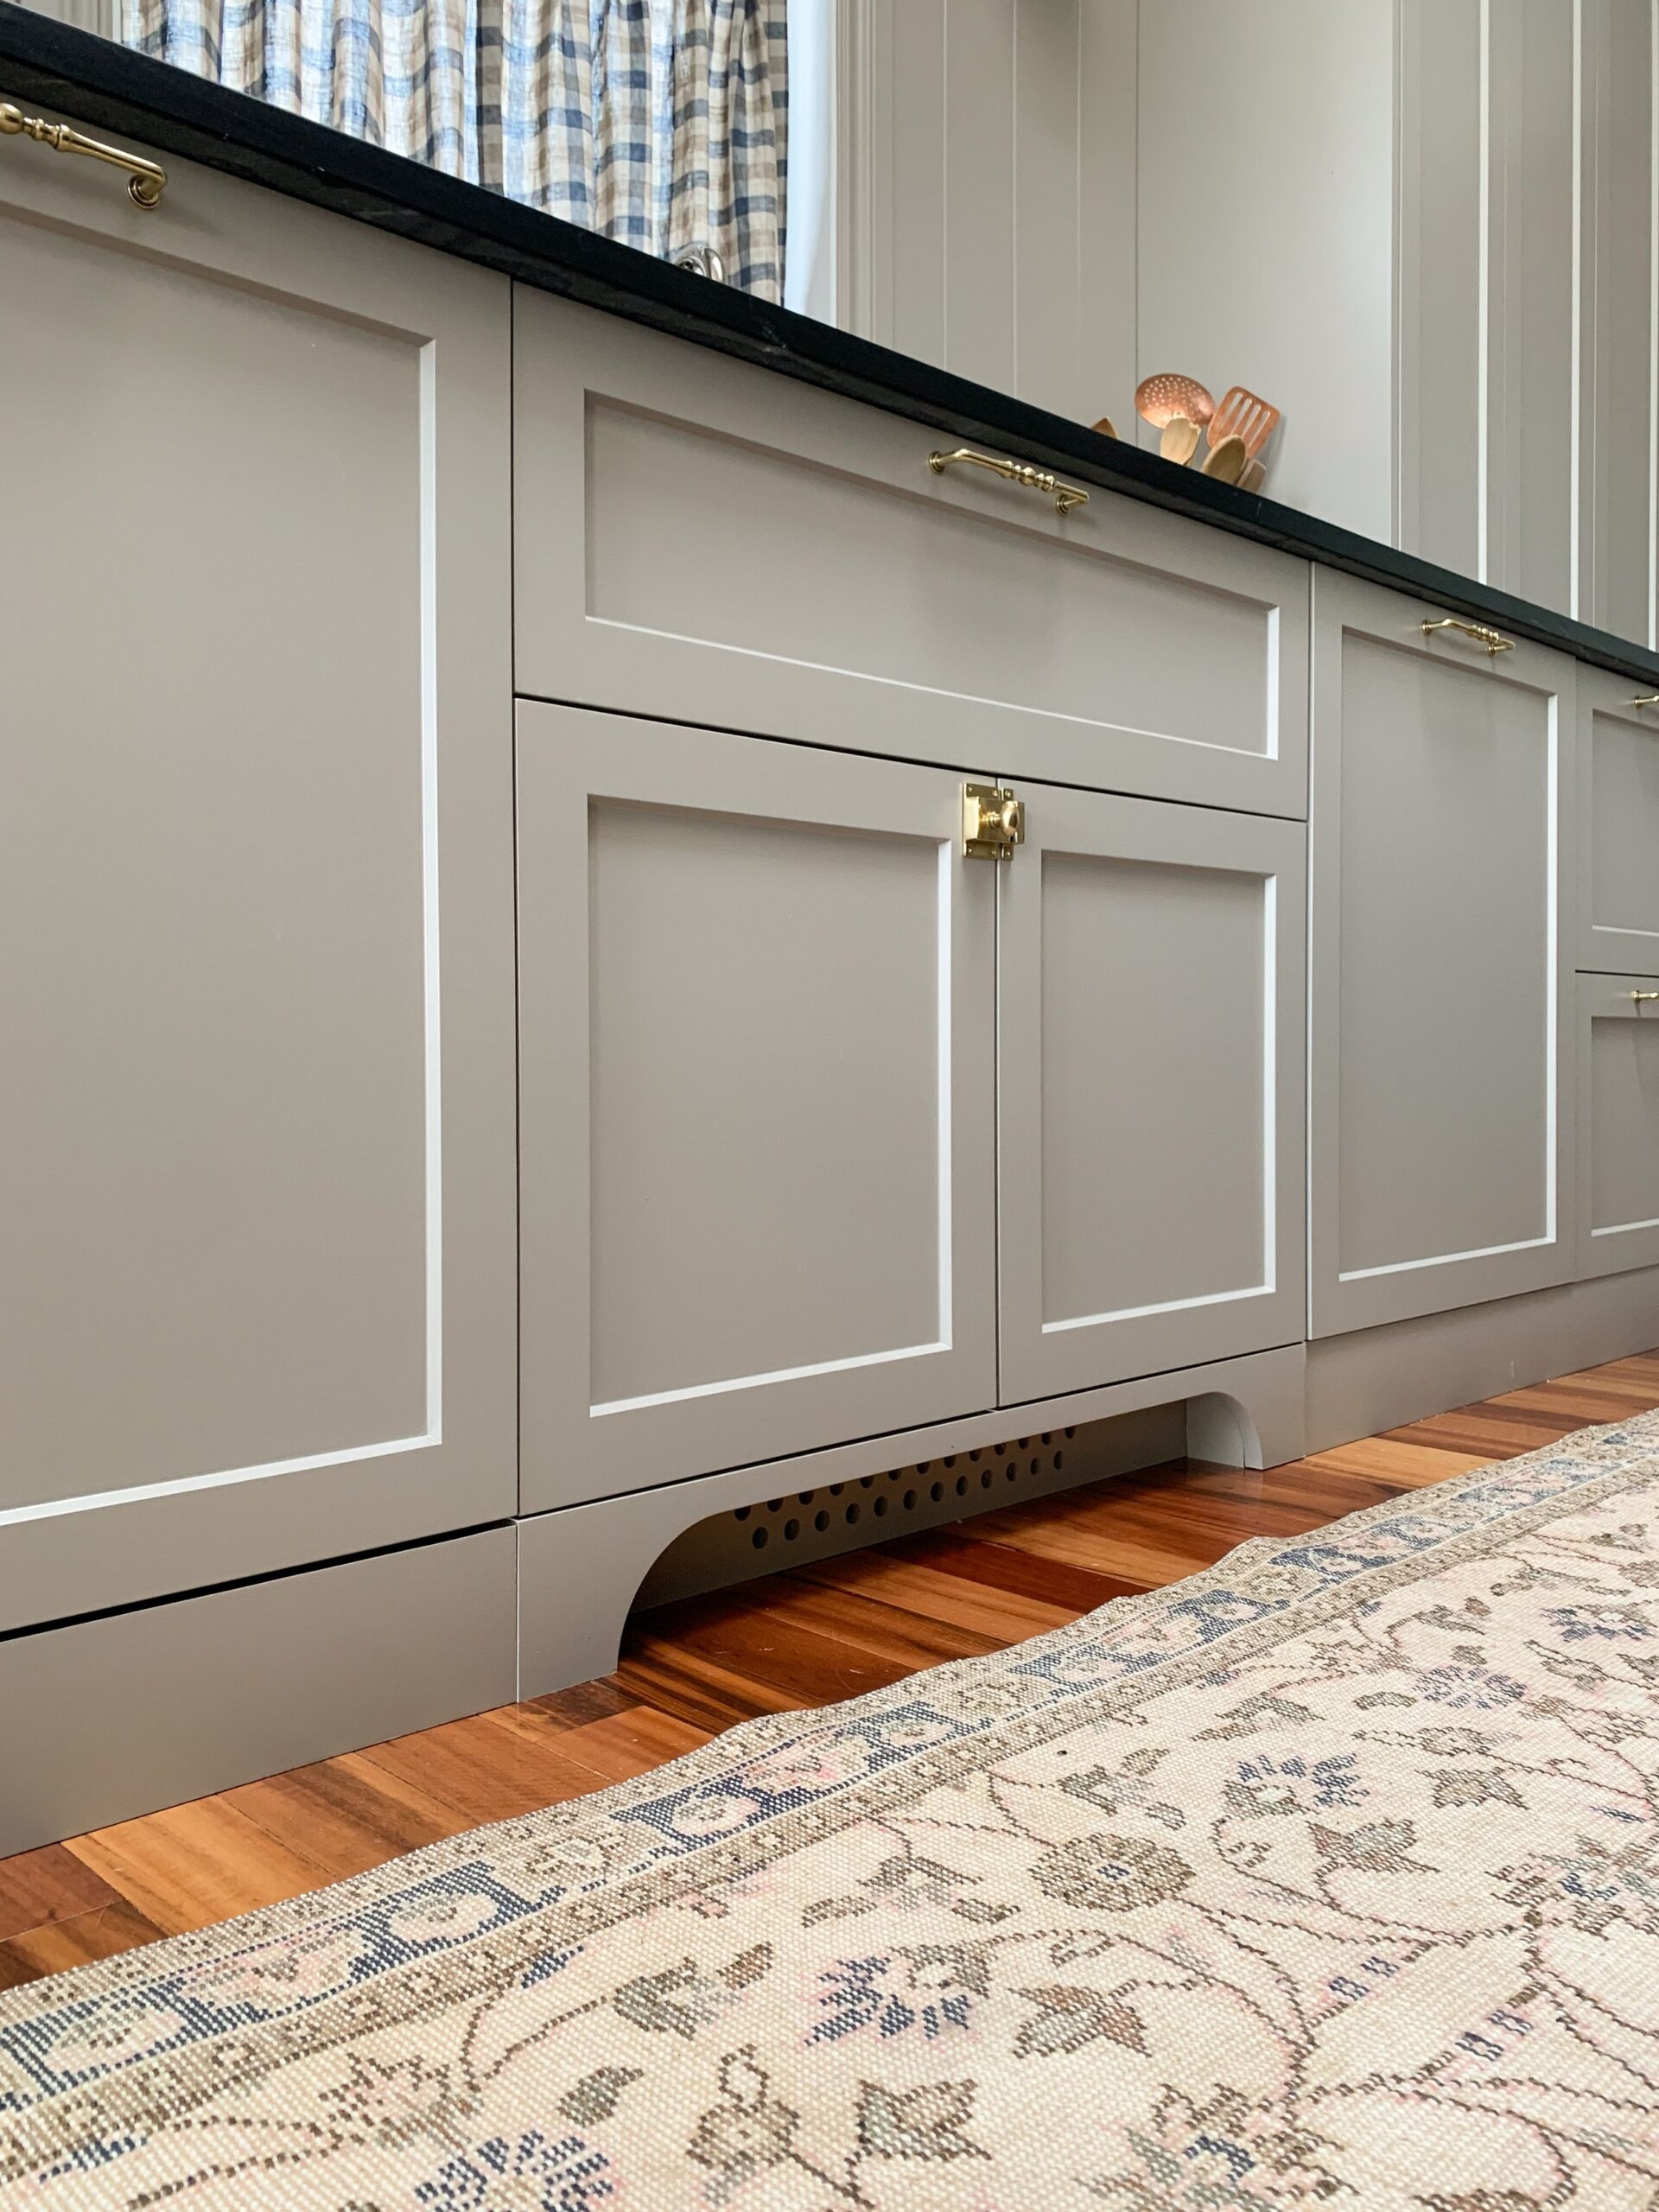 Arched toe kick in front of sink wtih vent holes cut in toe kick behind the arch, beige cabinets, vintage rug